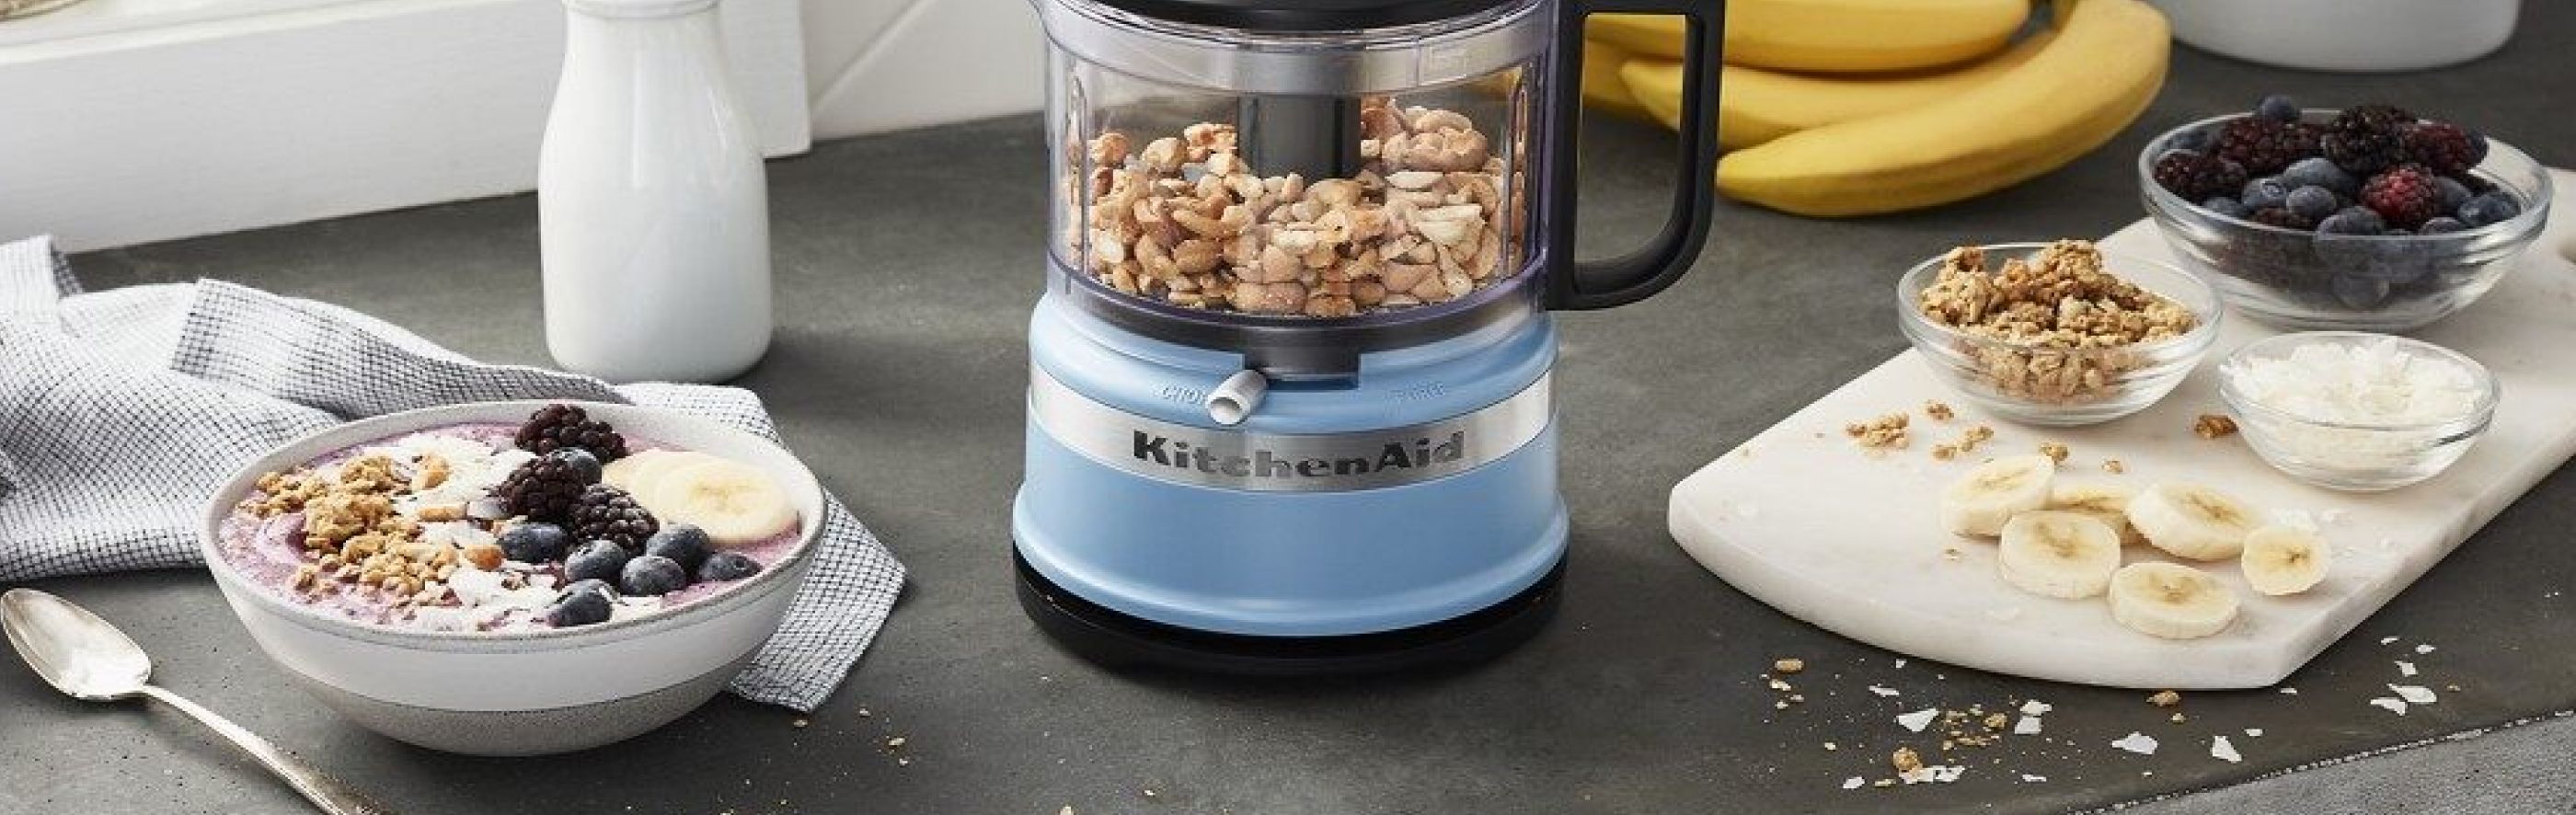 Can You Smoothies in Food Processor? KitchenAid